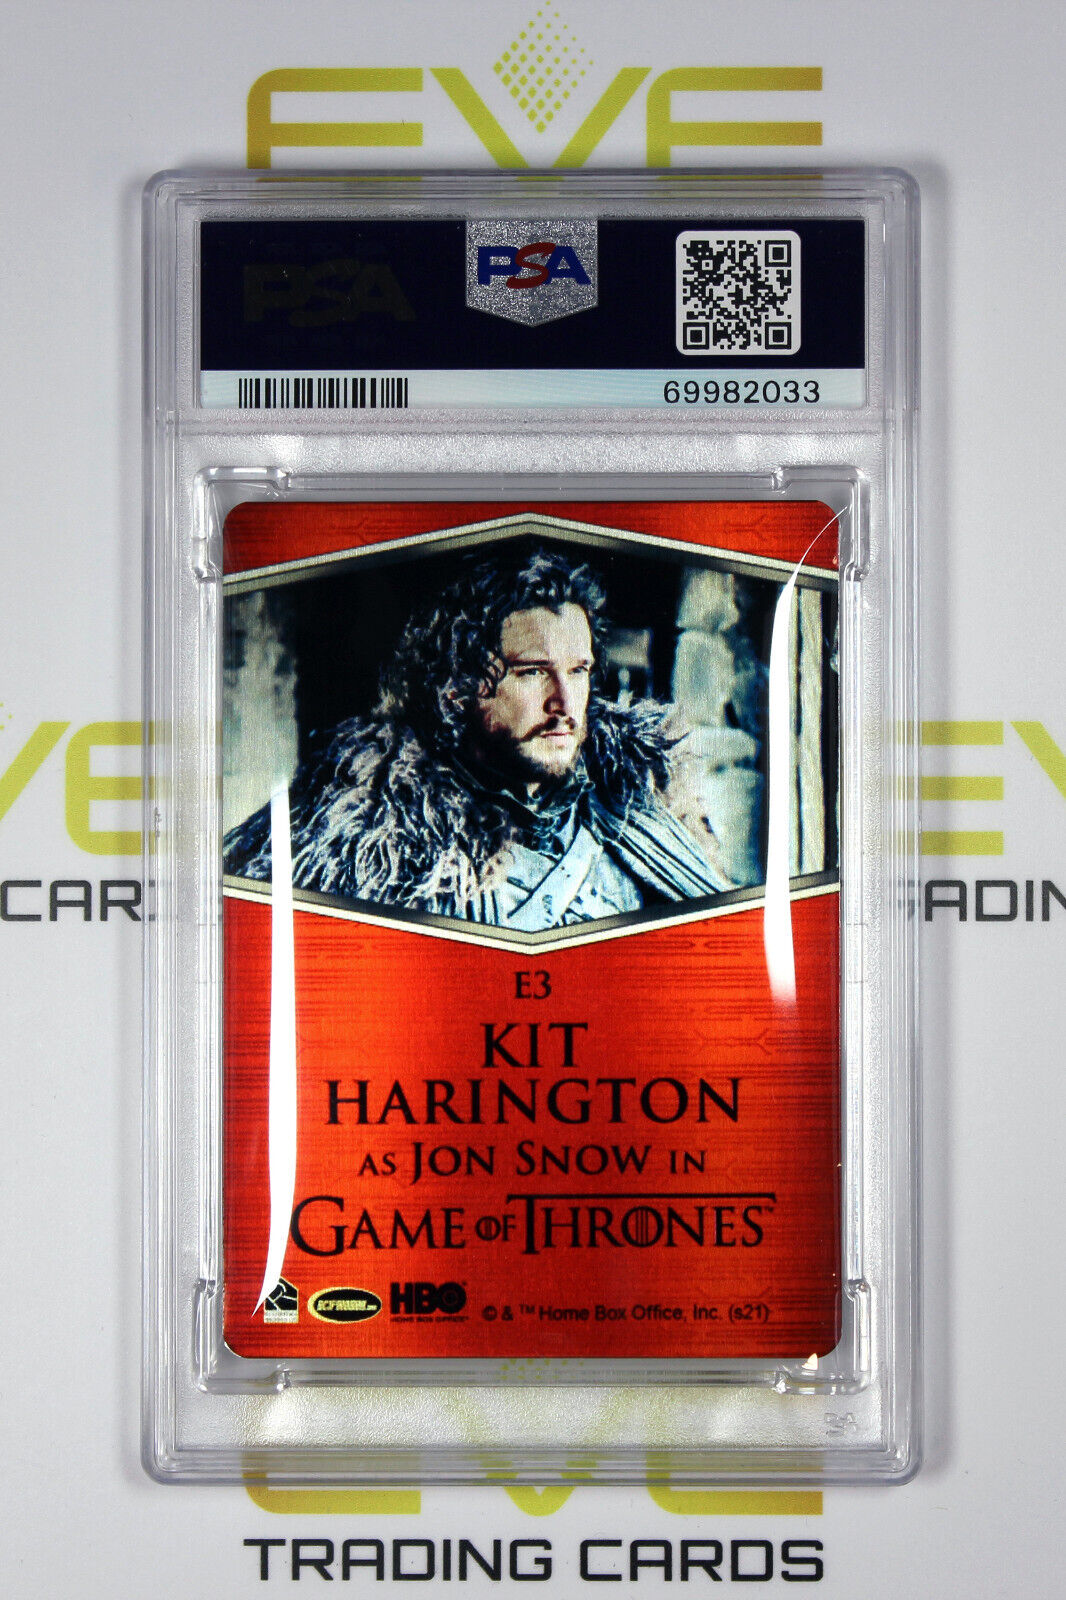 Graded Game of Thrones Card - #E3 2021 Jon Snow - Expressions - PSA 9